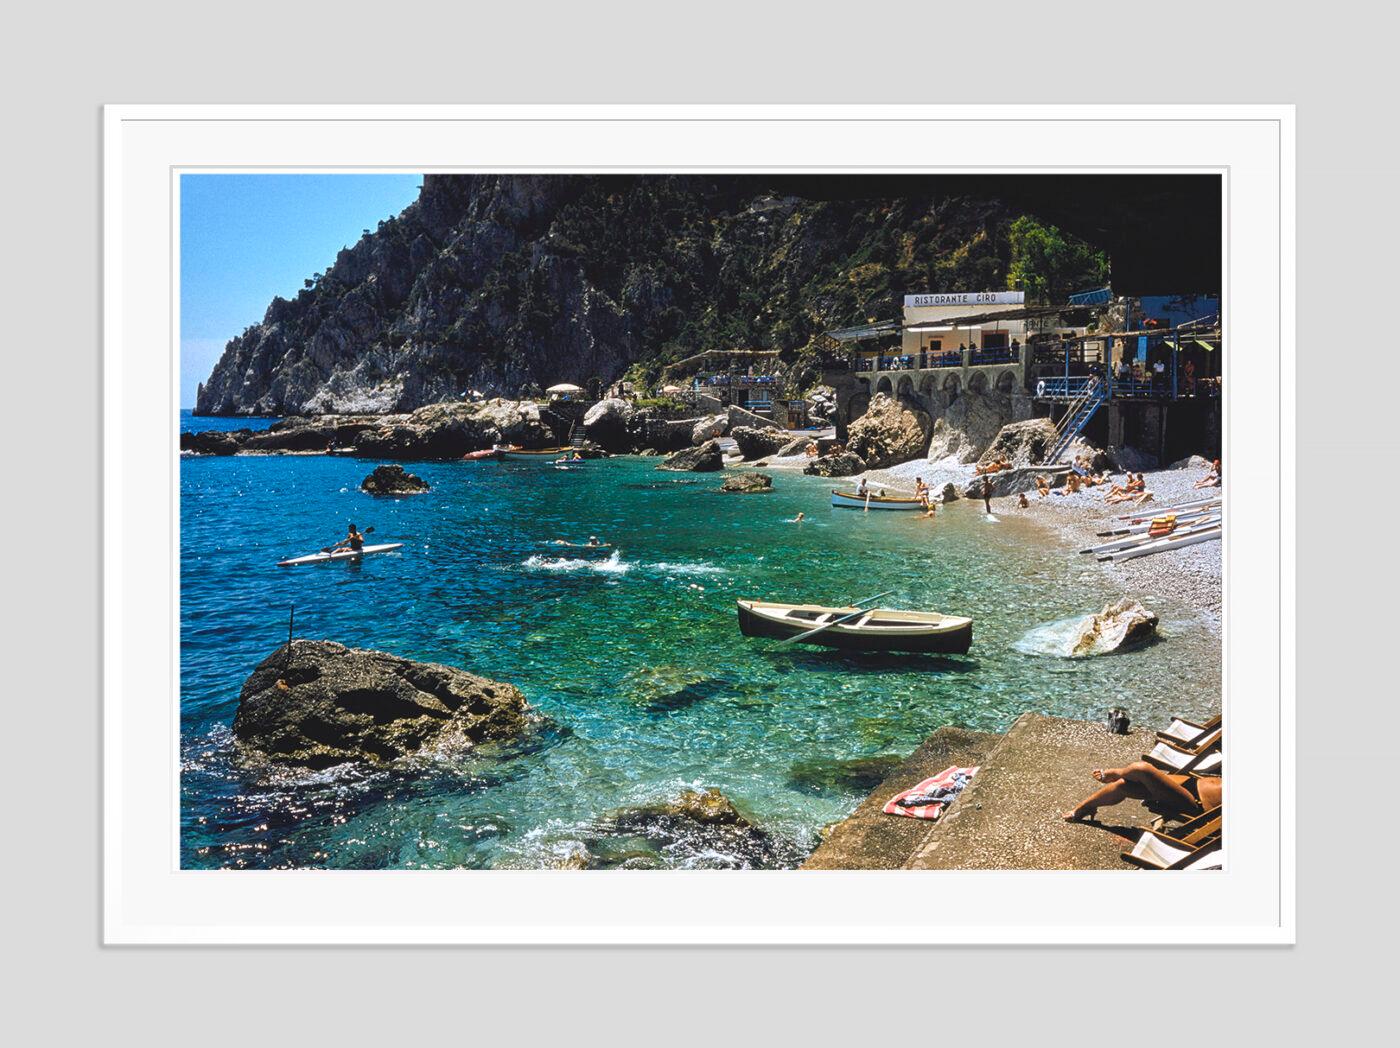 A Beach In Capri 1959 Limited Signature Stamped Edition  - Modern Photograph by Toni Frissell